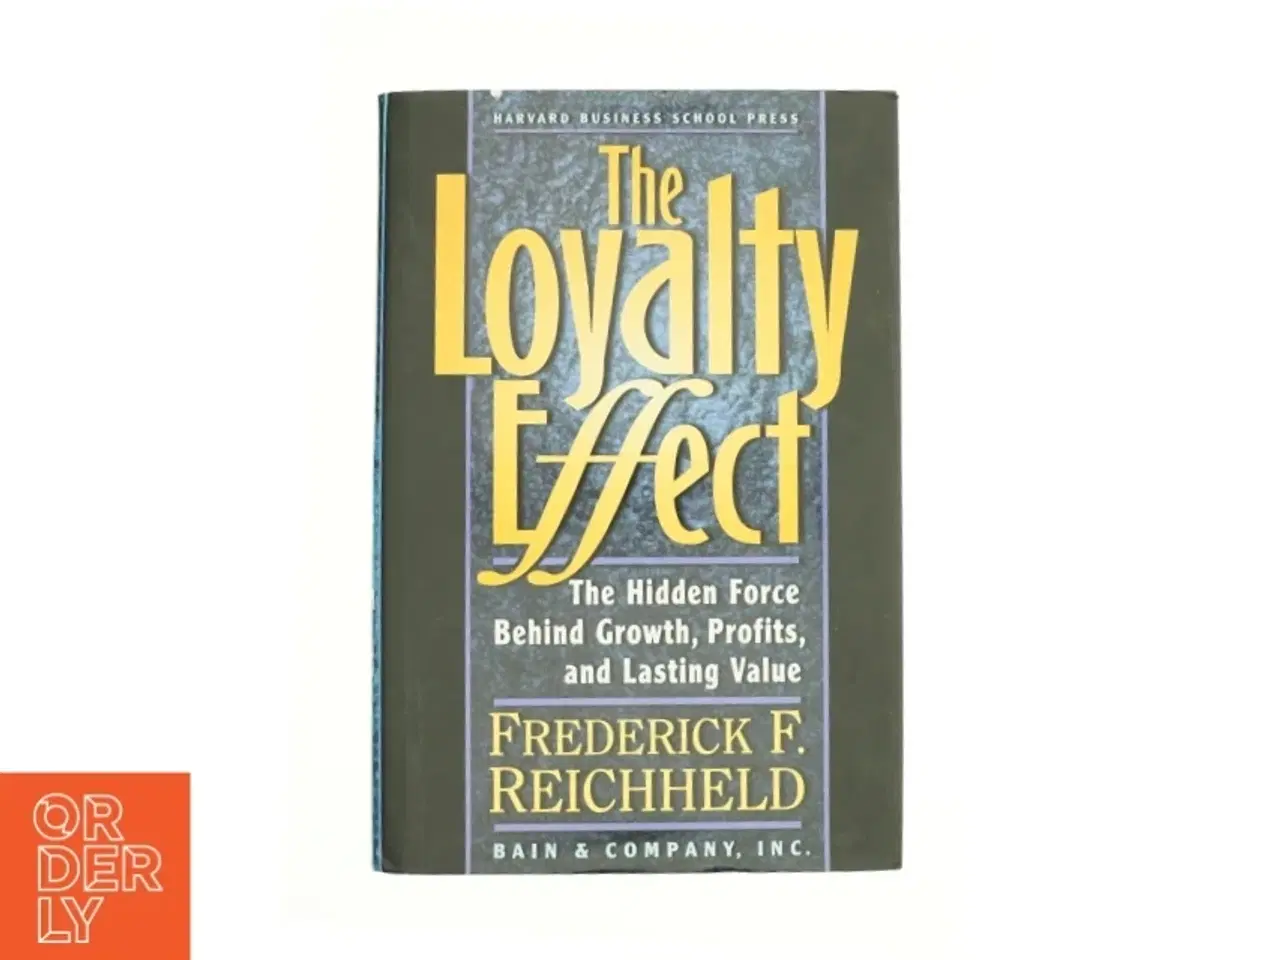 Billede 1 - The Loyalty Effect : the Hidden Force Behind Growth, Profits, and Lasting Value by Frederick F., Teal, Thomas Reichheld af Reichheld, Frederick F. / T